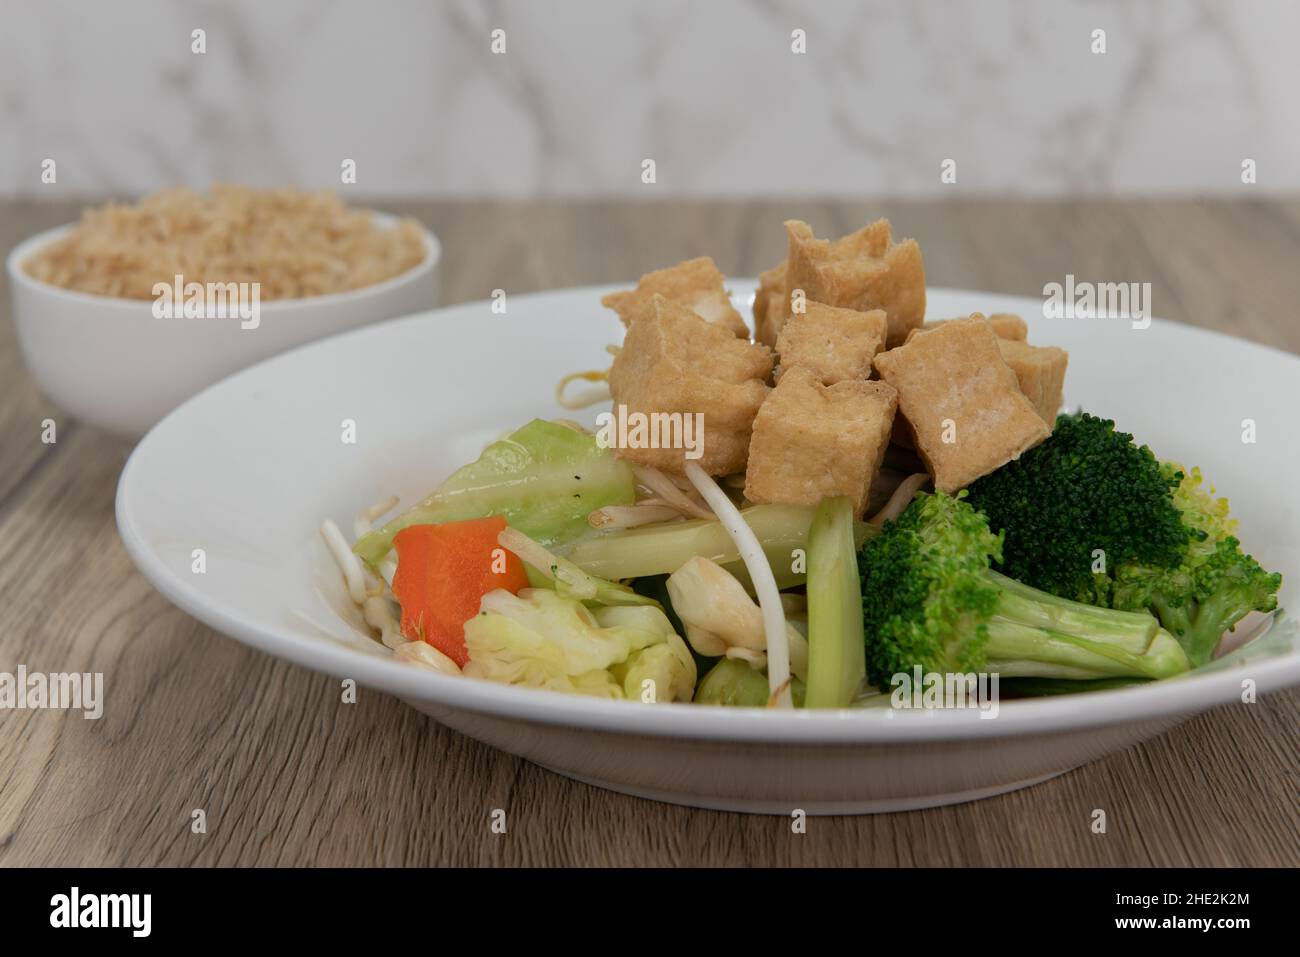 Breaded orange chicken crispy on the outside with sliced citrus twist on top of generous pile of food. Stock Photo